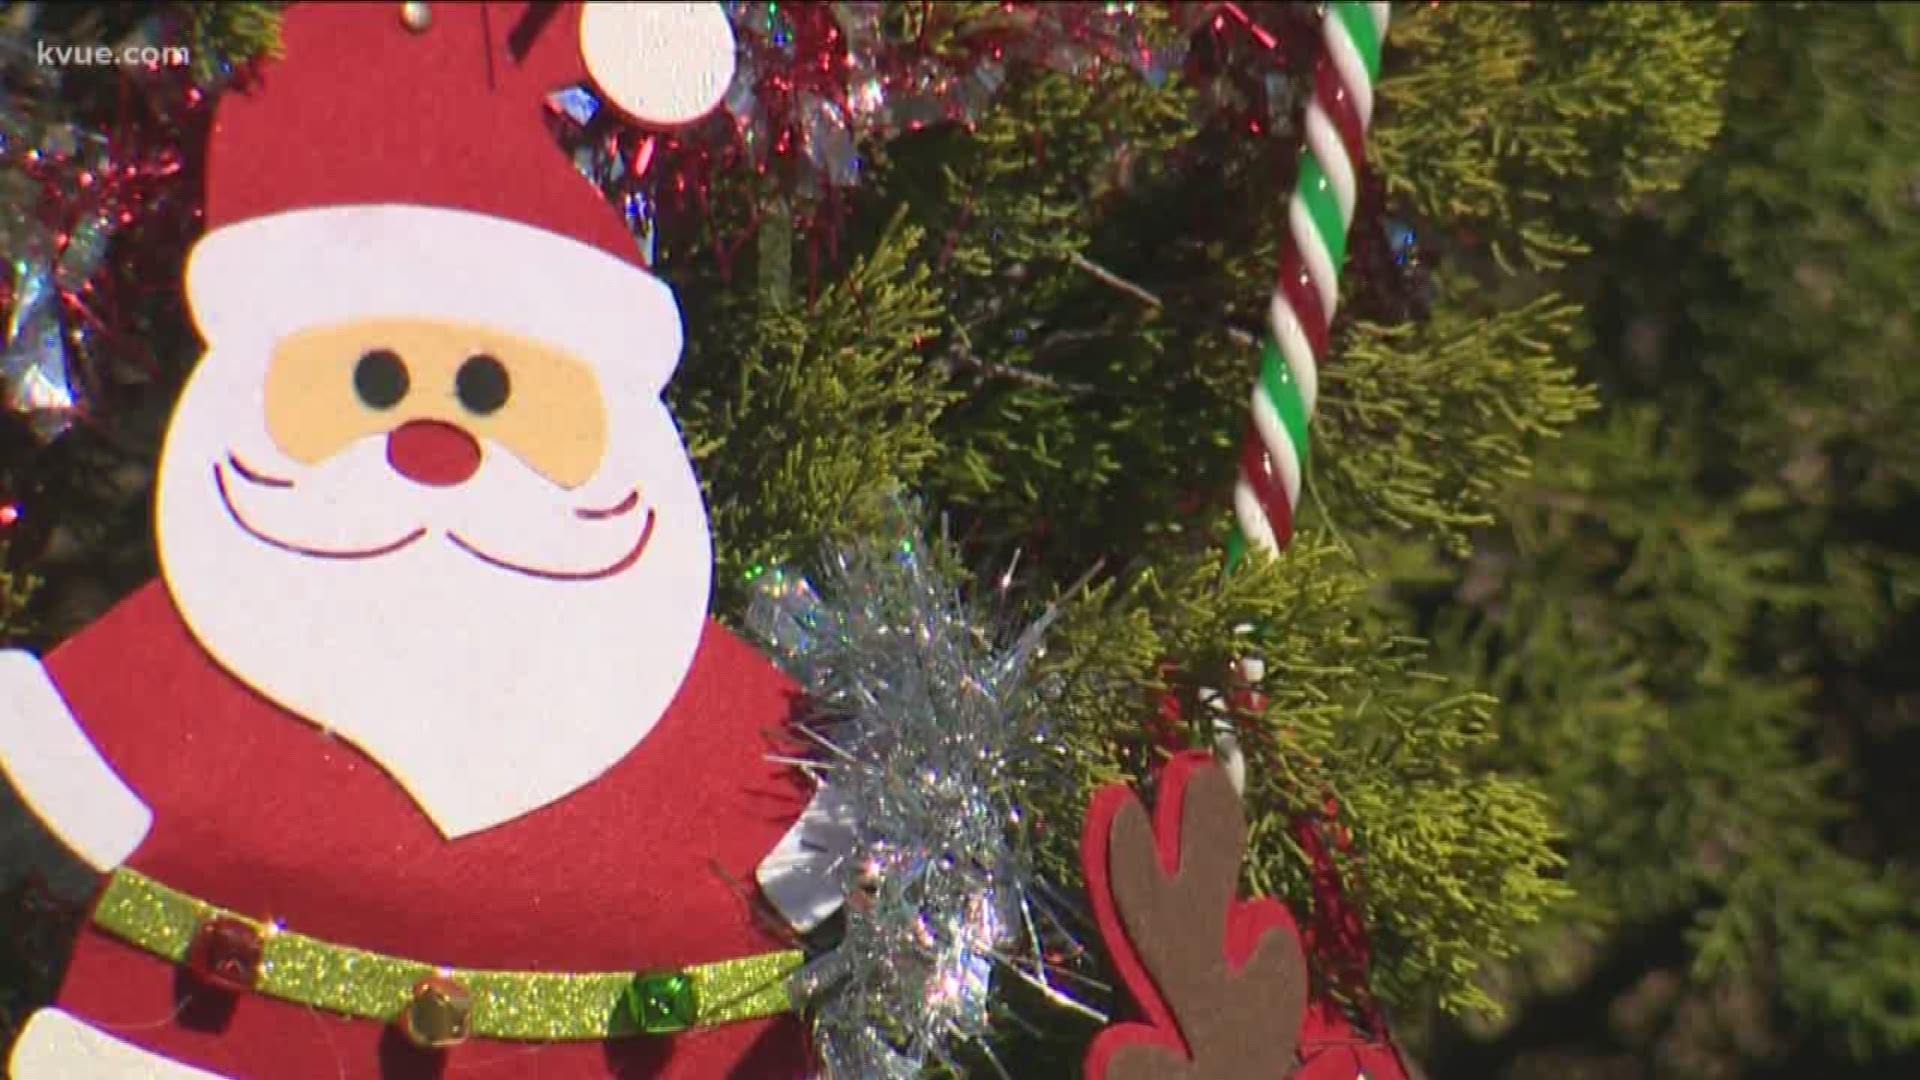 Family and friends get together to decorate cedar trees in Austin every year -- but trash left behind can turn the tradition into an ugly mess.